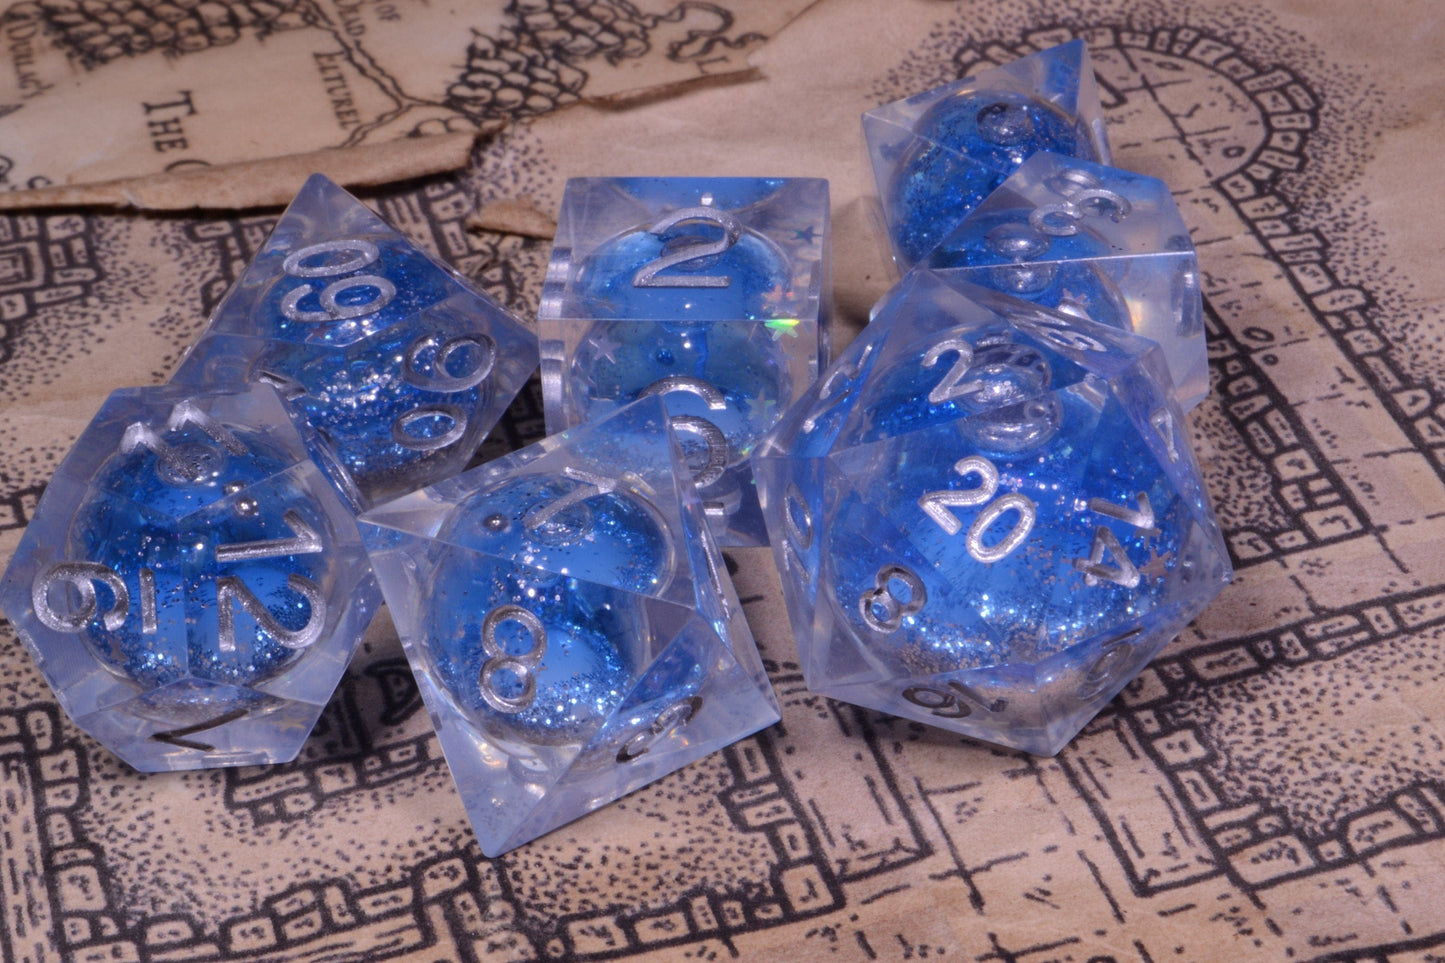 Blue Liquid Core Star Glitter | Sharp Edge Resin Dice | Dungeons and Dragons | Pathfinder | DND Dice | Dice Set | Polyhedral Dice | RPG Dice